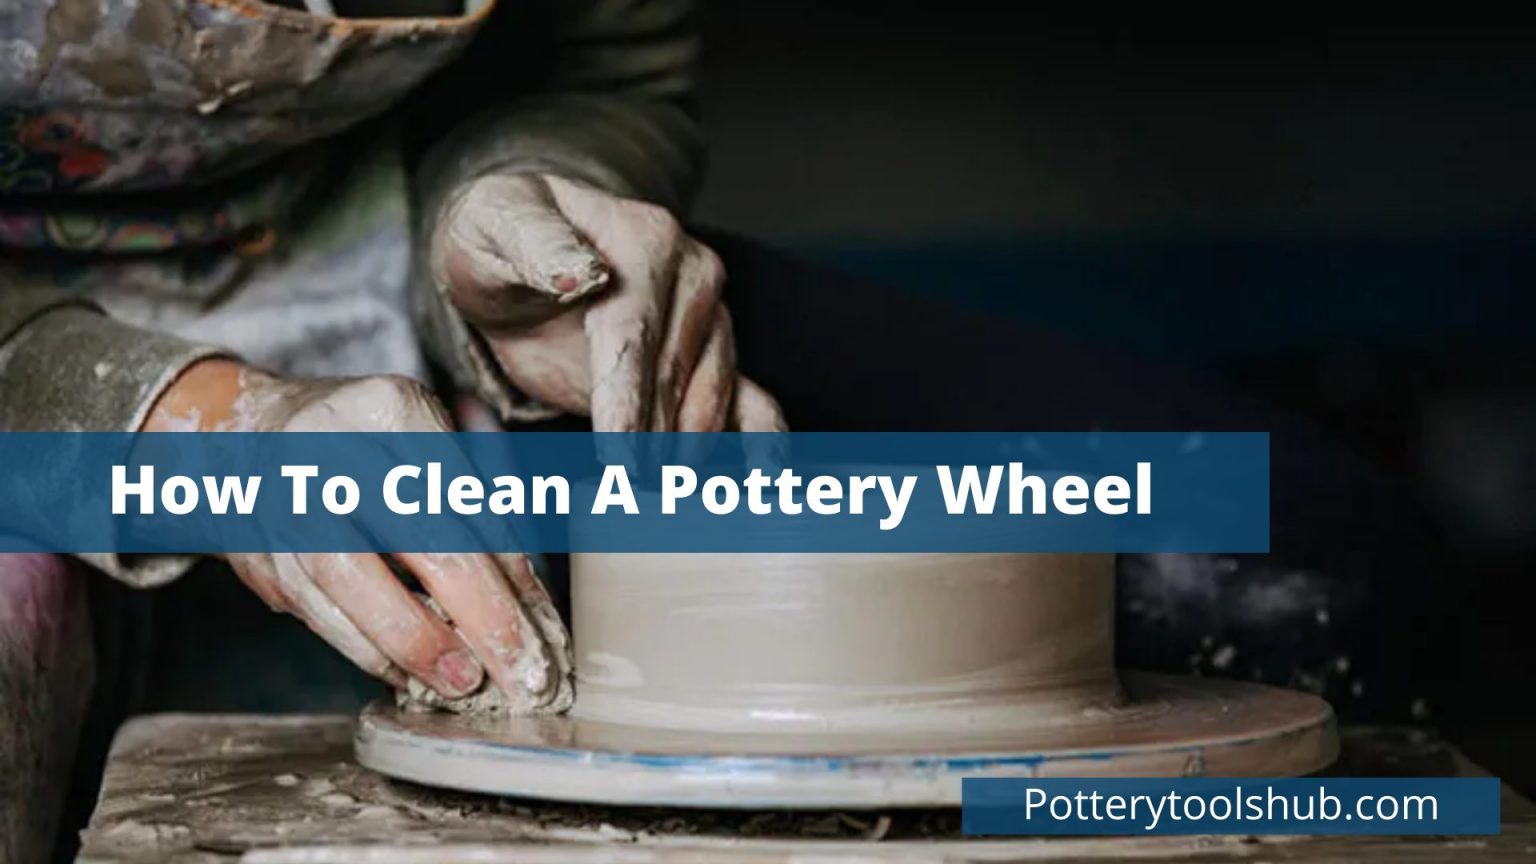 How to Clean A Pottery Wheel – A Short and Easy Guide